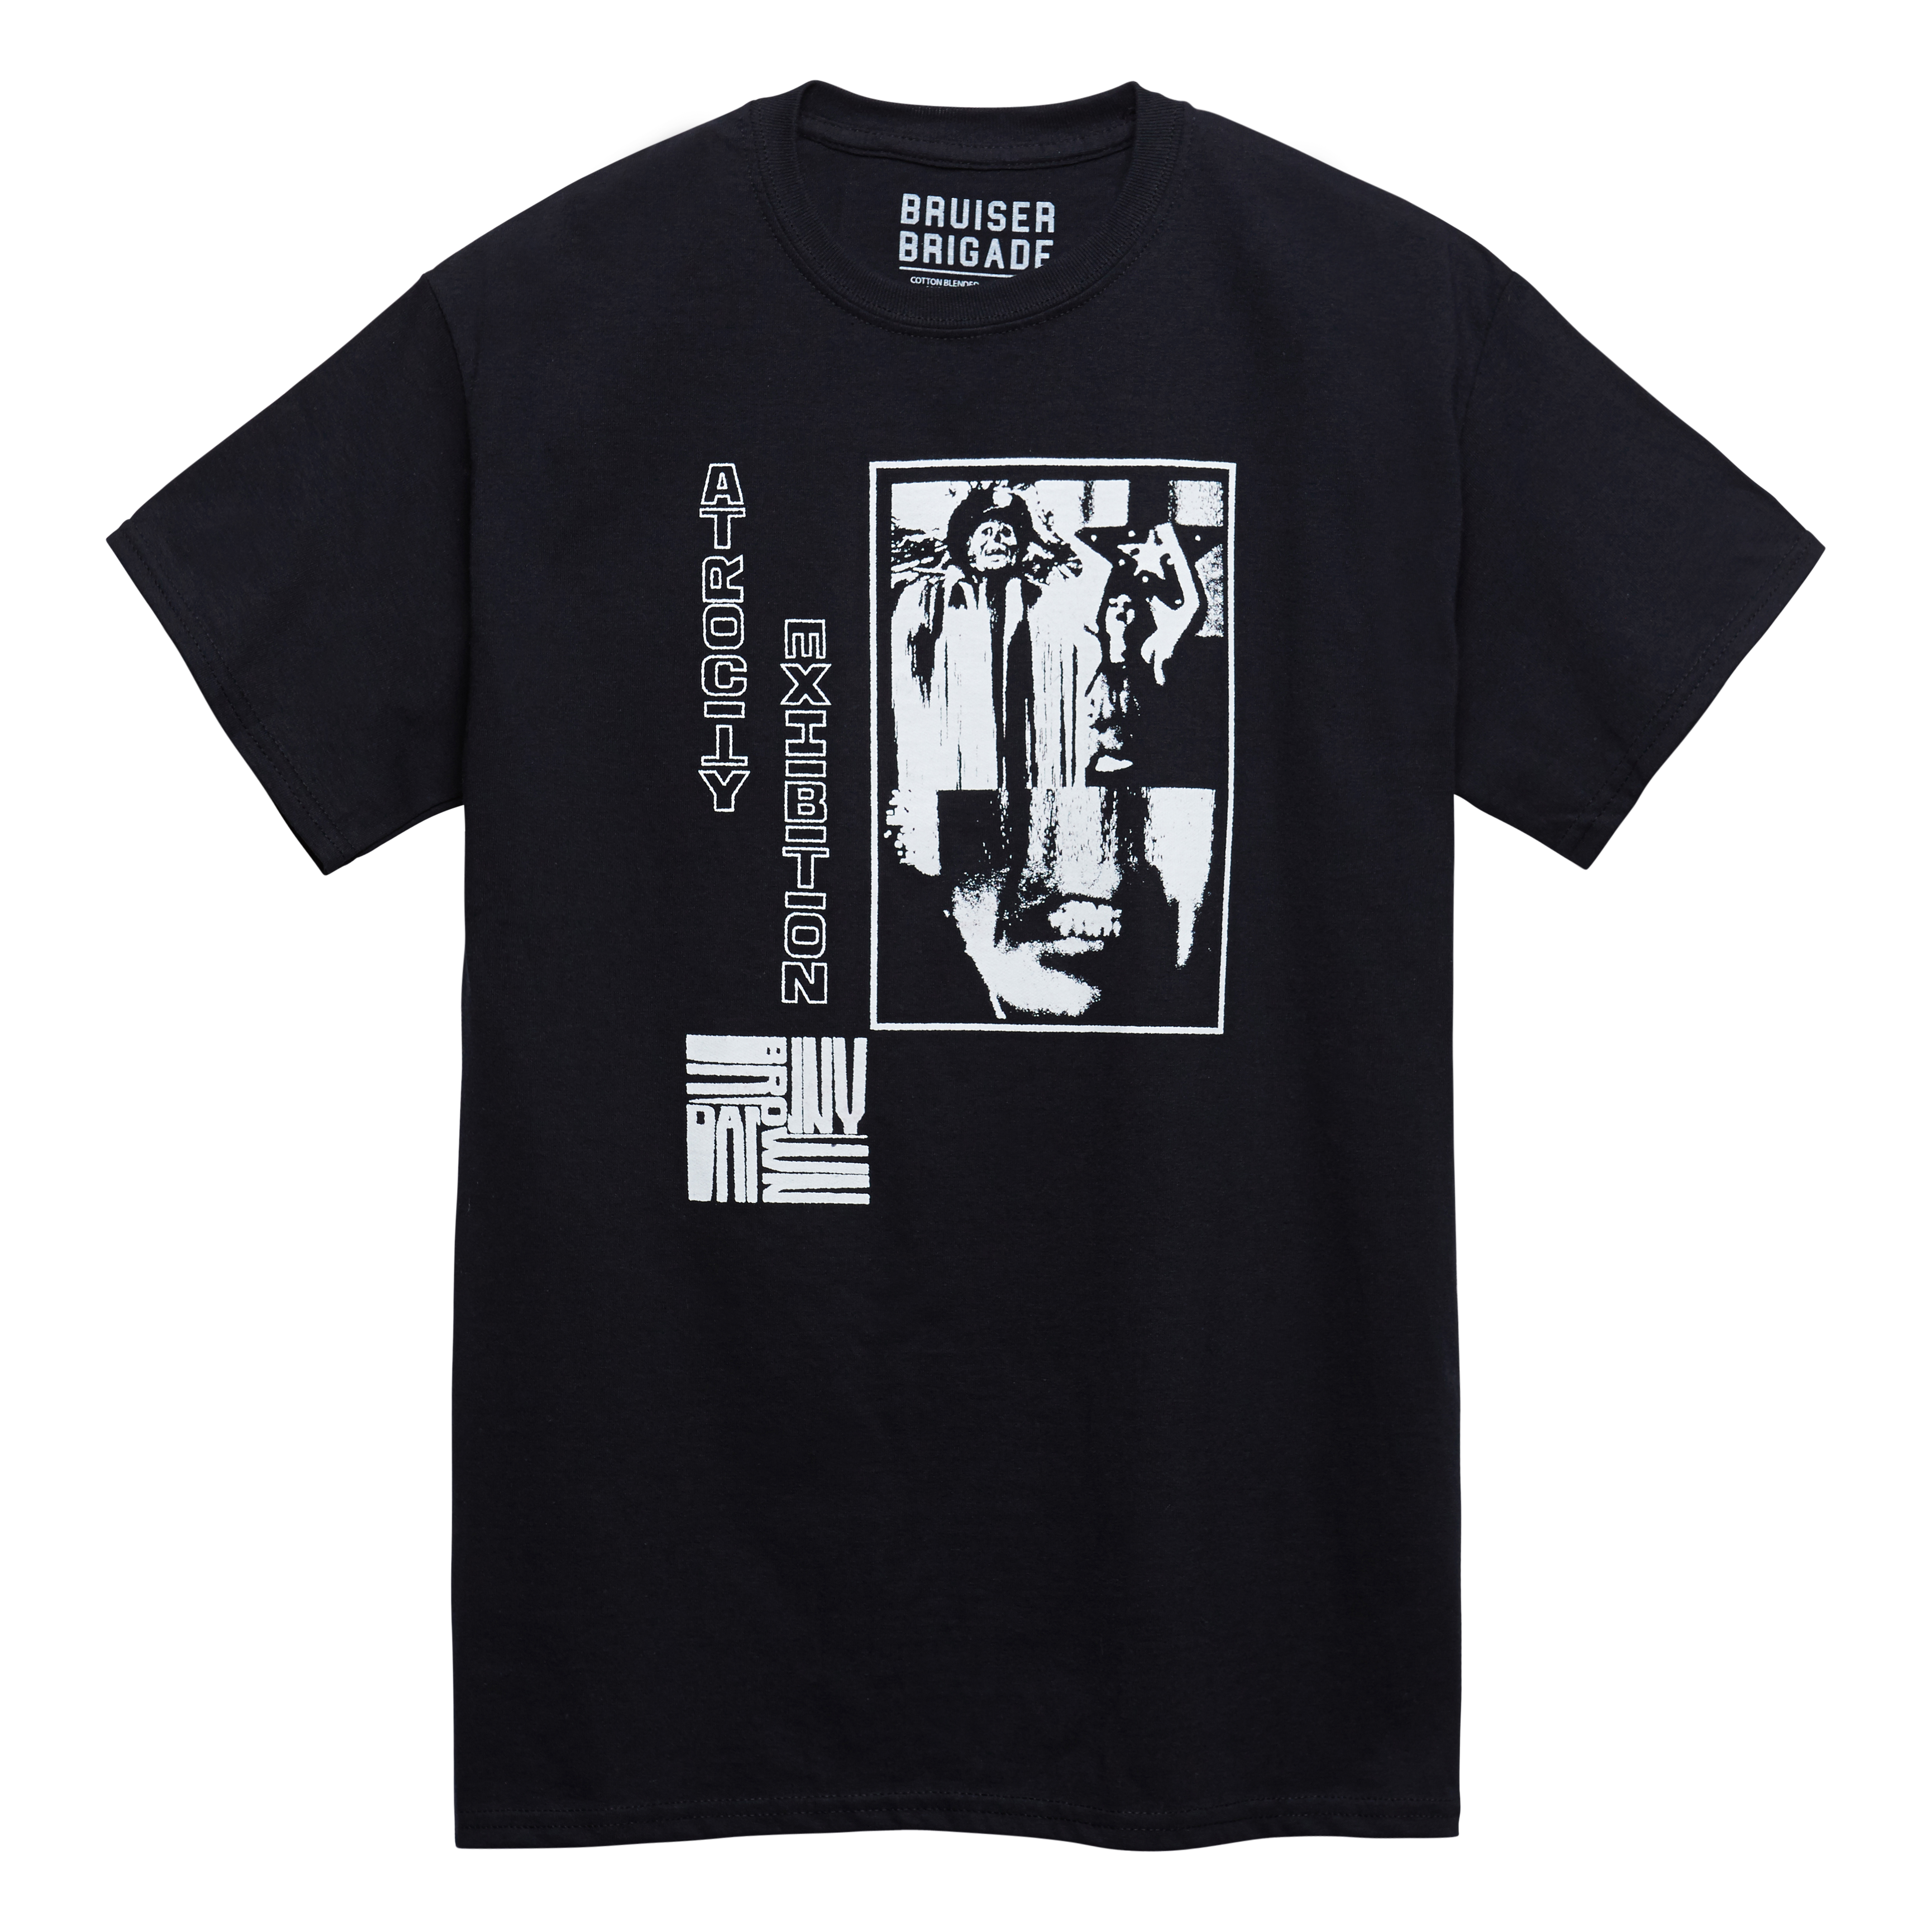 This is Danny Brown&#x27;s &#x27;Atrocity Exhibition&#x27; merch with PacSun.